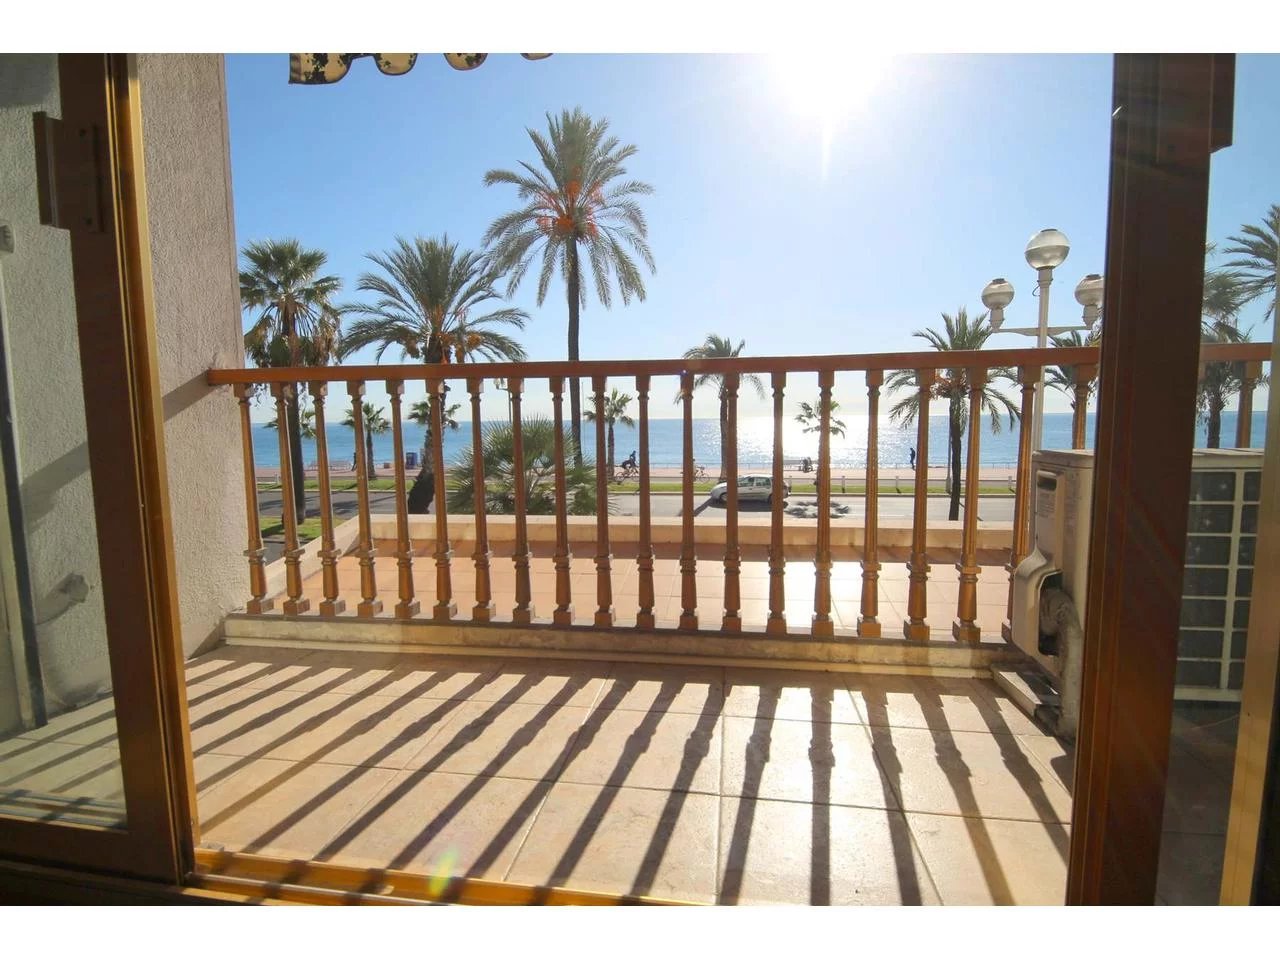 Appartement  3 Rooms 80.93m2  for sale   670 000 €